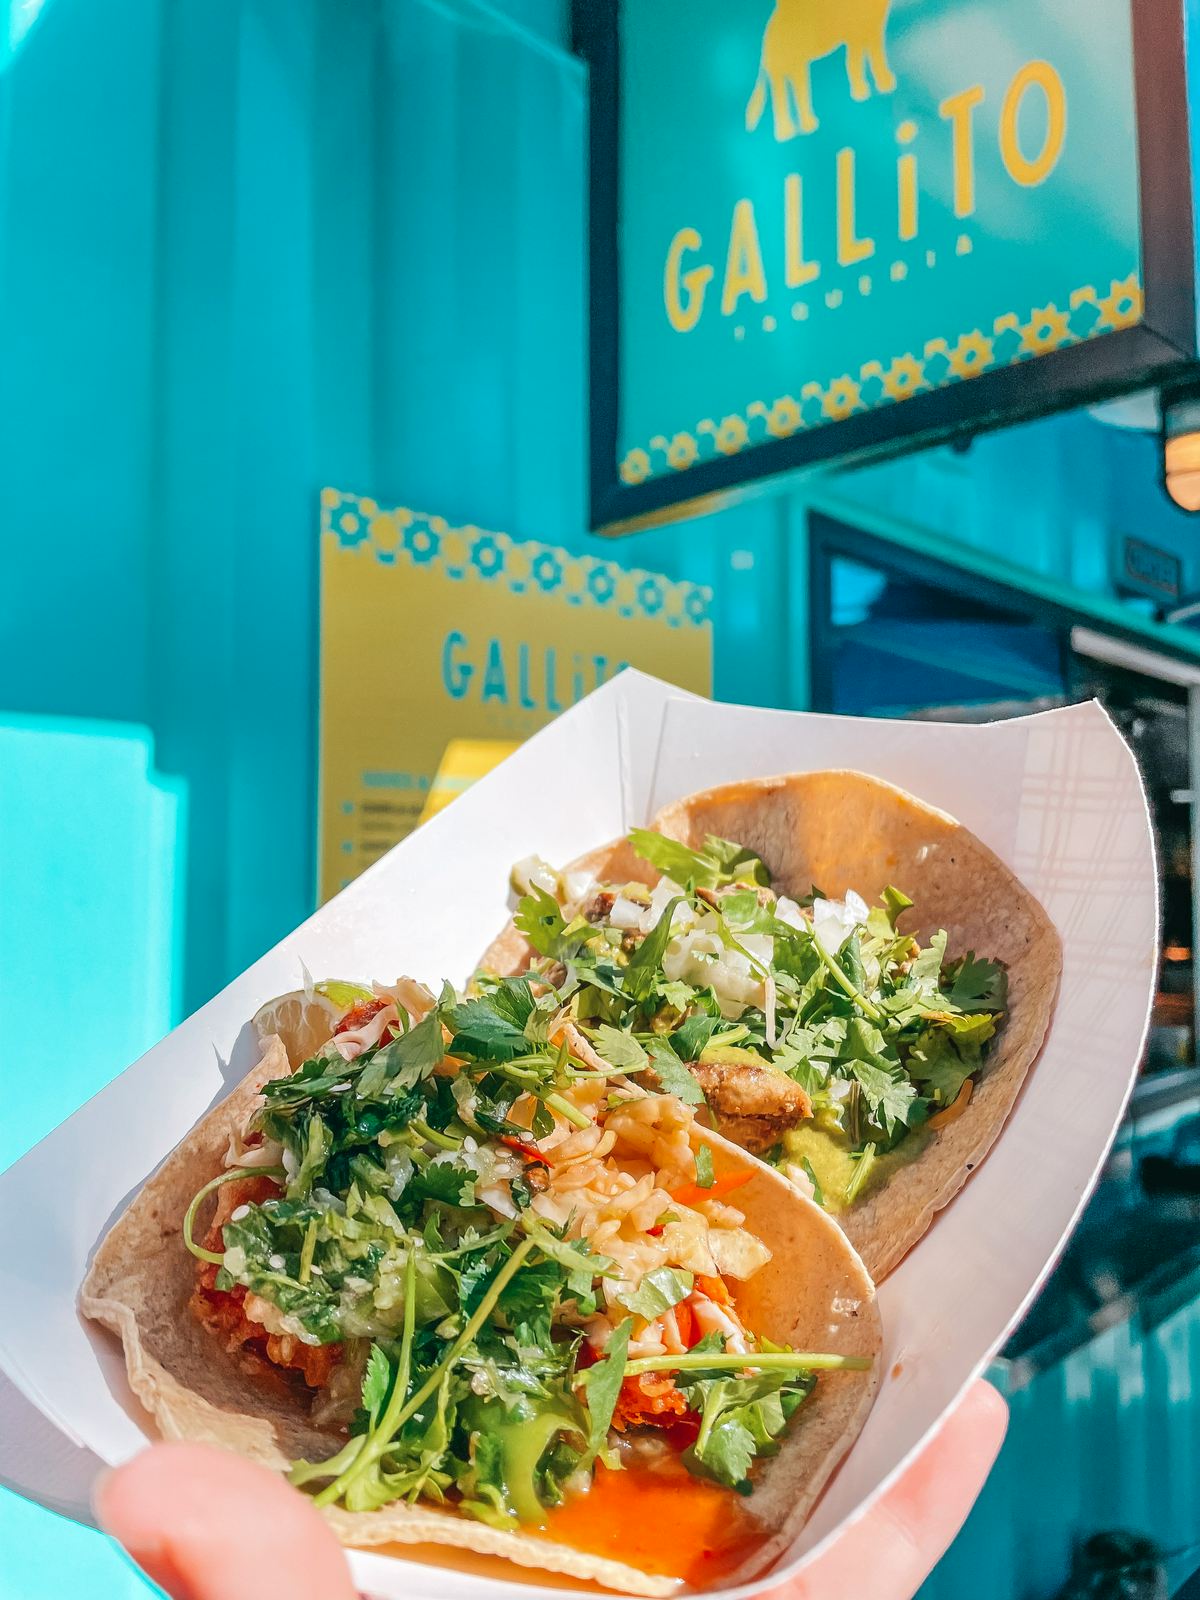 Gallito tacos, one of the best restaurants in Sparkman Wharf